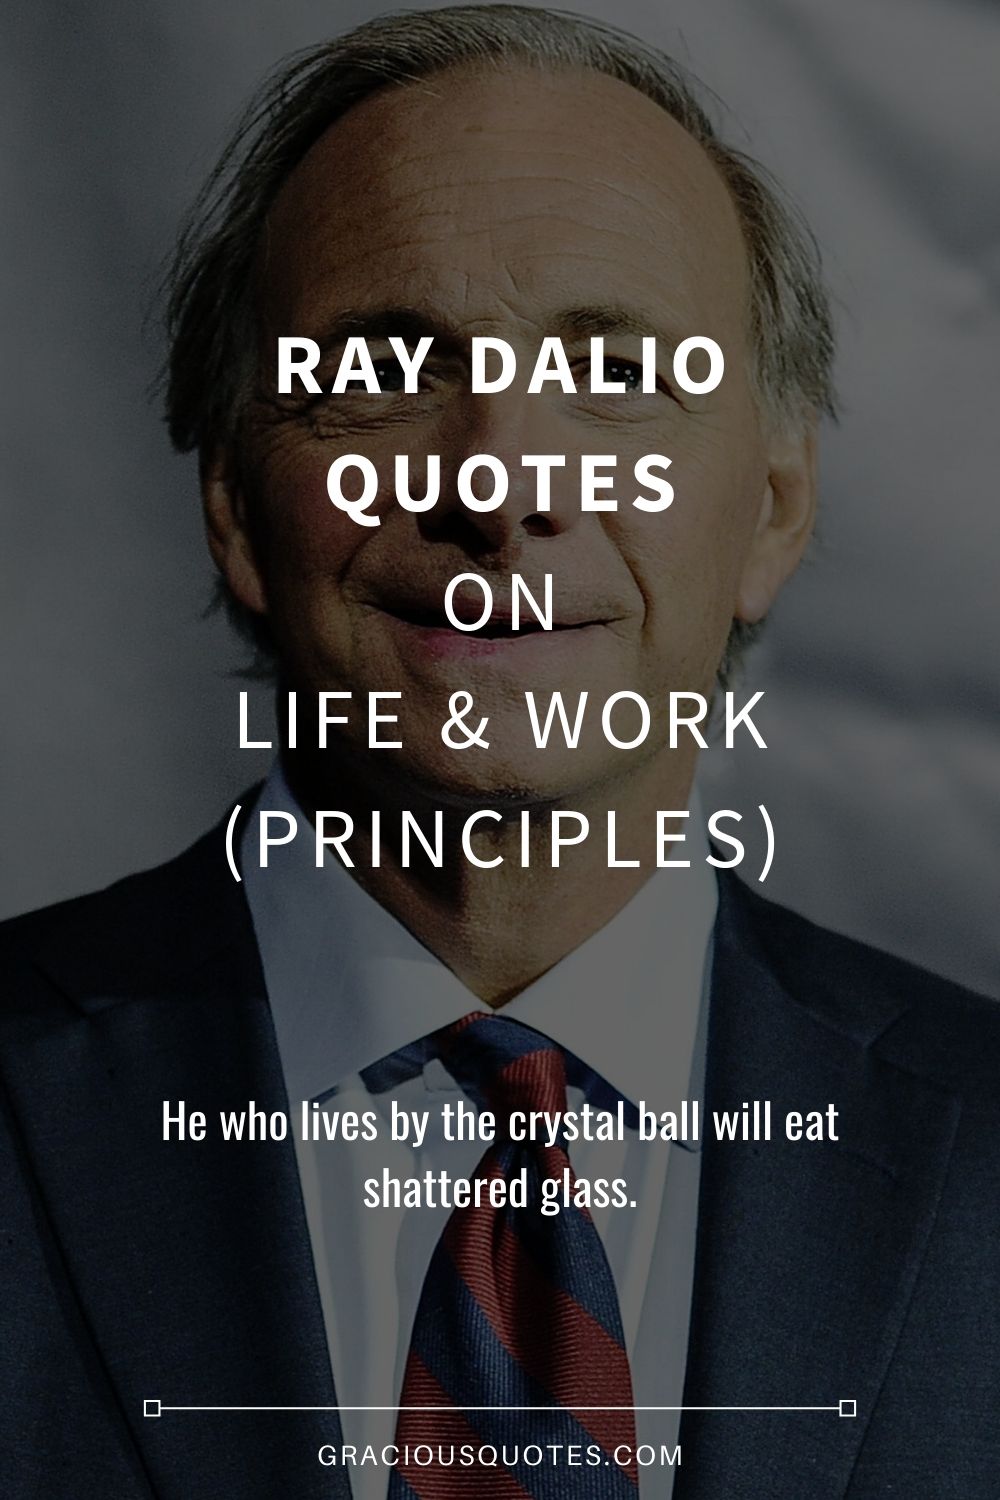 Ray Dalio Quotes on Life & Work (PRINCIPLES) - Gracious Quotes